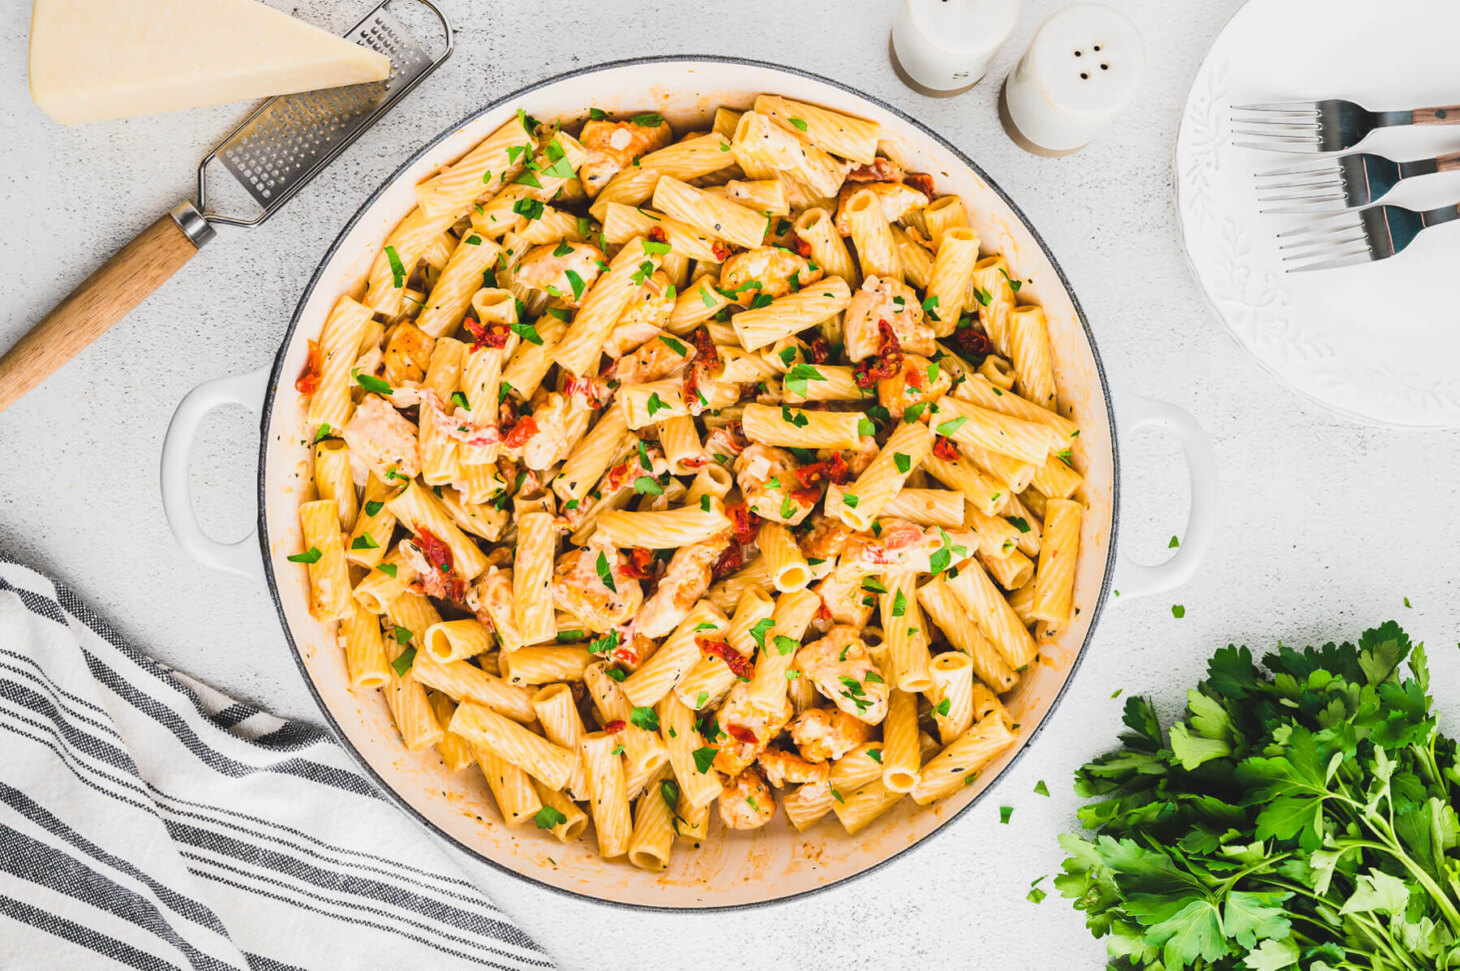 A table scene wit a white pan full of Marry Me Chicken Pasta featuring rigatoni pasta, chicken, sun dried tomatoes, and herbs in a creamy pasta sauce.